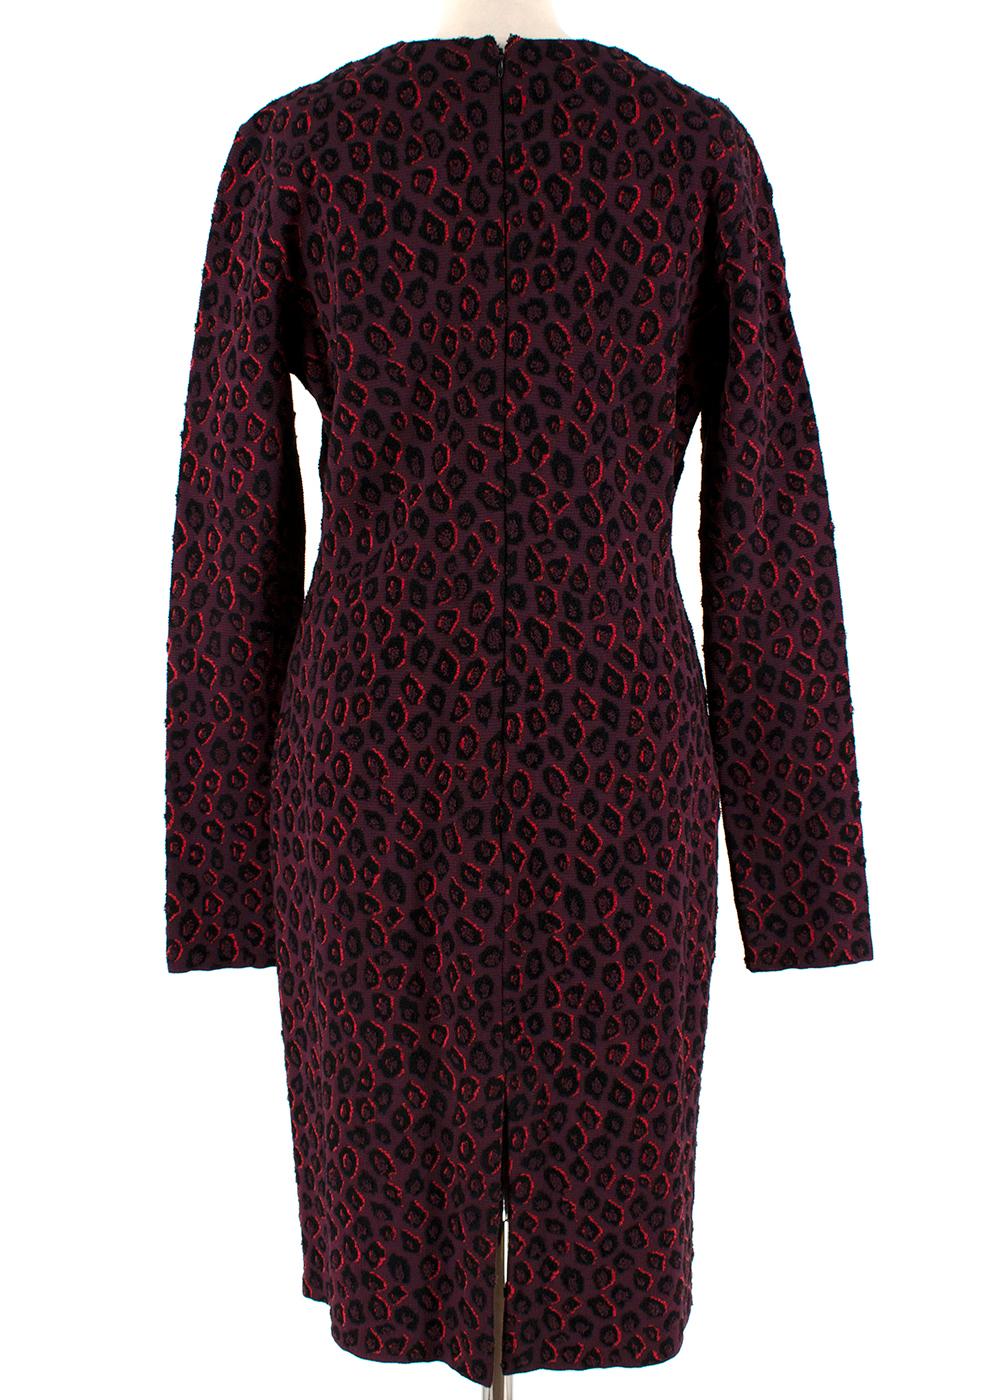 Givenchy Leopard Print Knit Burgundy Midi Dress

-Classic long sleeve cut 
-Luxurious knit with boucle texture details 
-Invisible zip fastening to the back
-Round shaped neckline 
-Back slit 

Materials:
50% viscose, 35 % cotton, 12% polyamide, 2 %